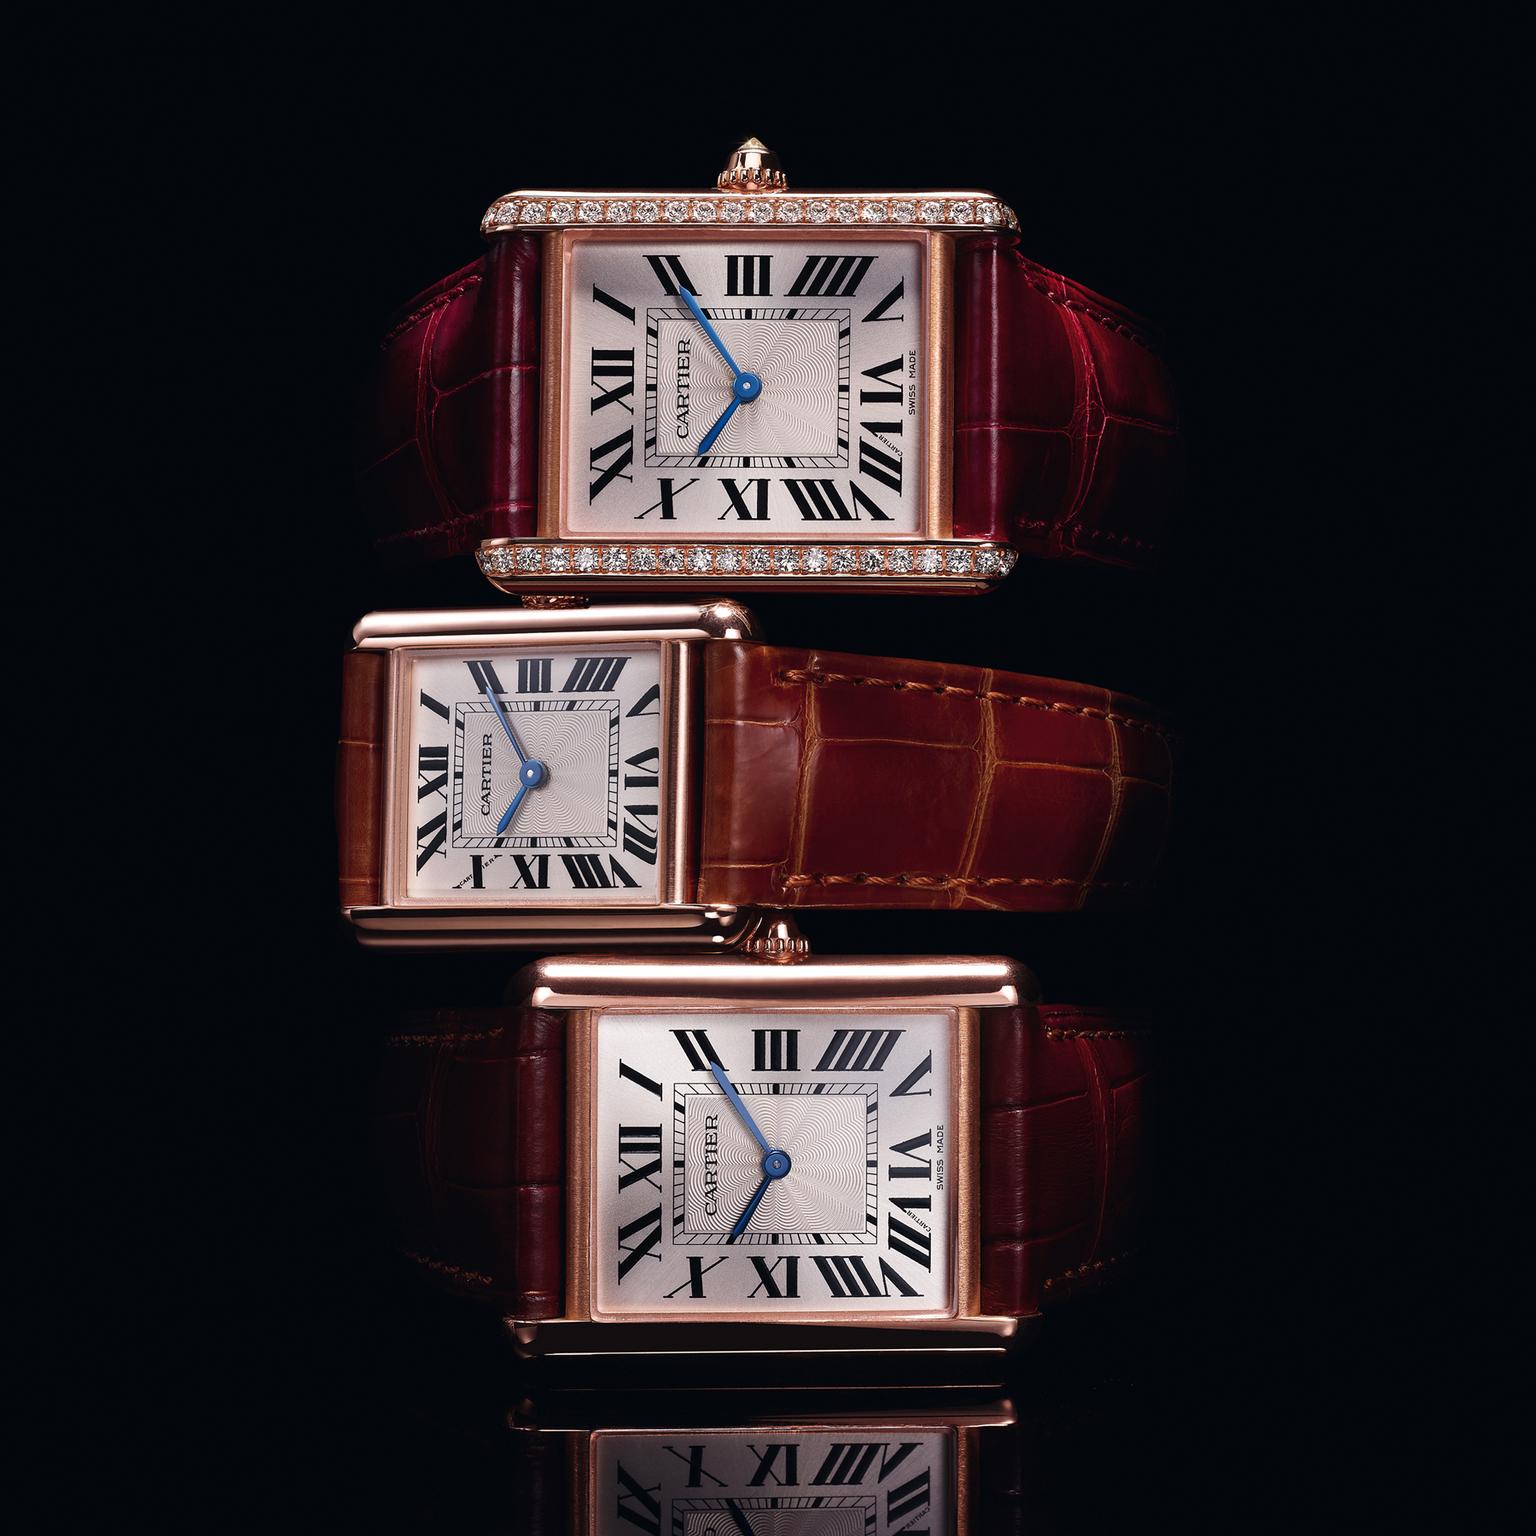 The Tank Louis Cartier is revisited in pink gold cases with the option of diamonds